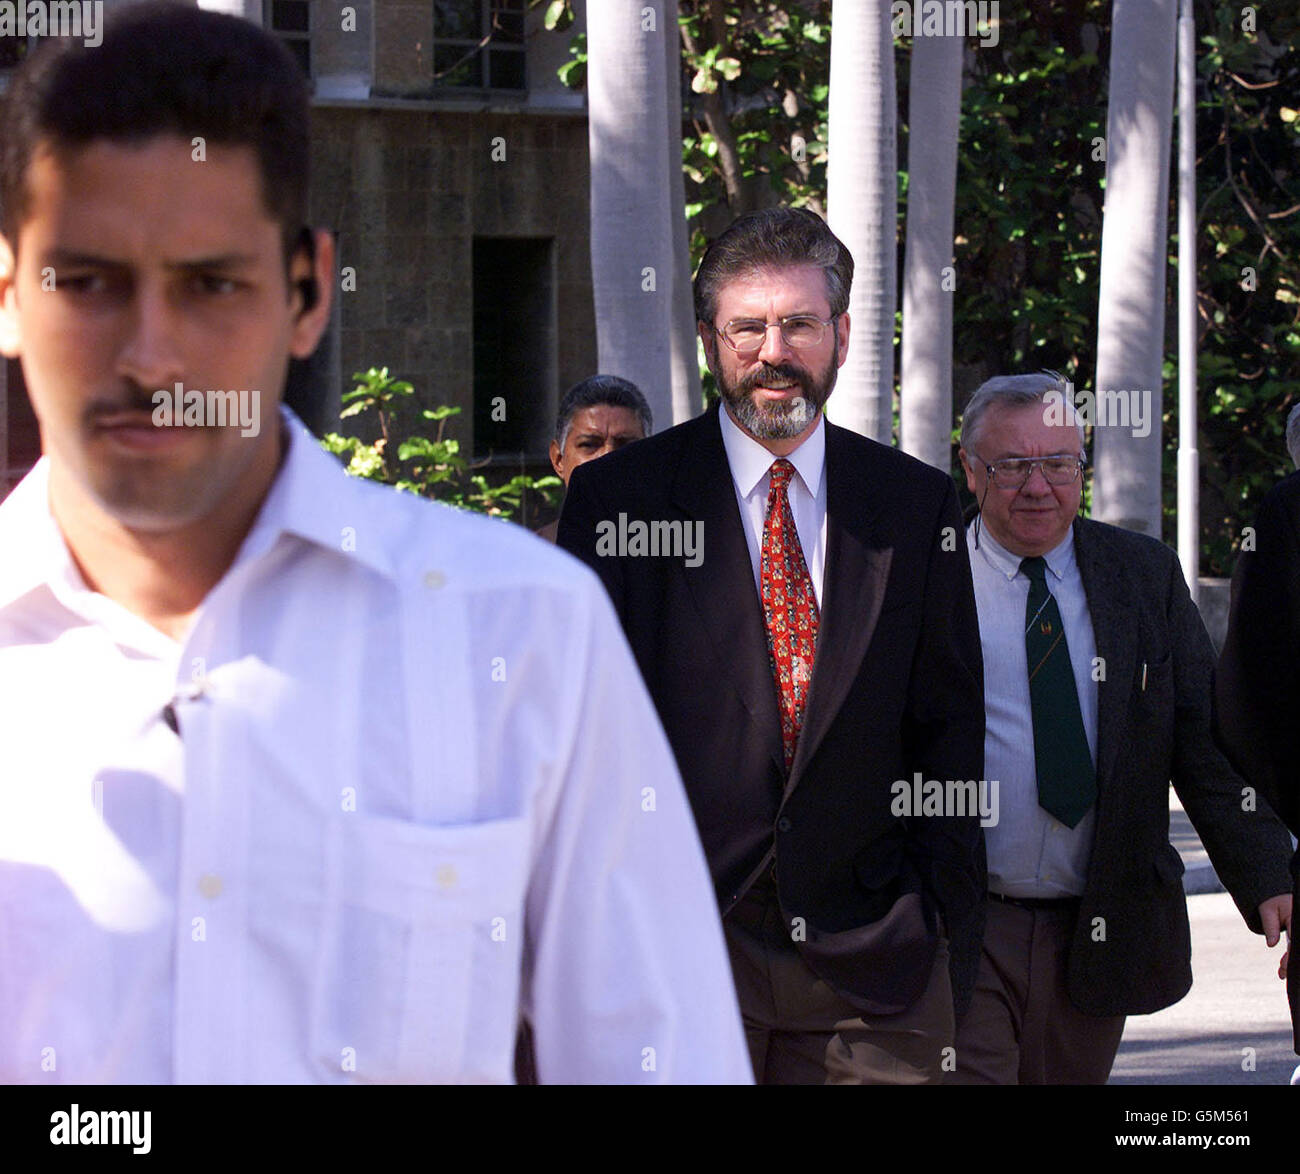 Sinn Fein President Gerry Adams, with colleague Pat Rice, being escorted to a Goverment meeting in Havana, by Cuban bodyguards. Adams called for the release of three Irishmen imprisoned by Colombian authorities after a meeting with senior Cuban government officials. Stock Photo